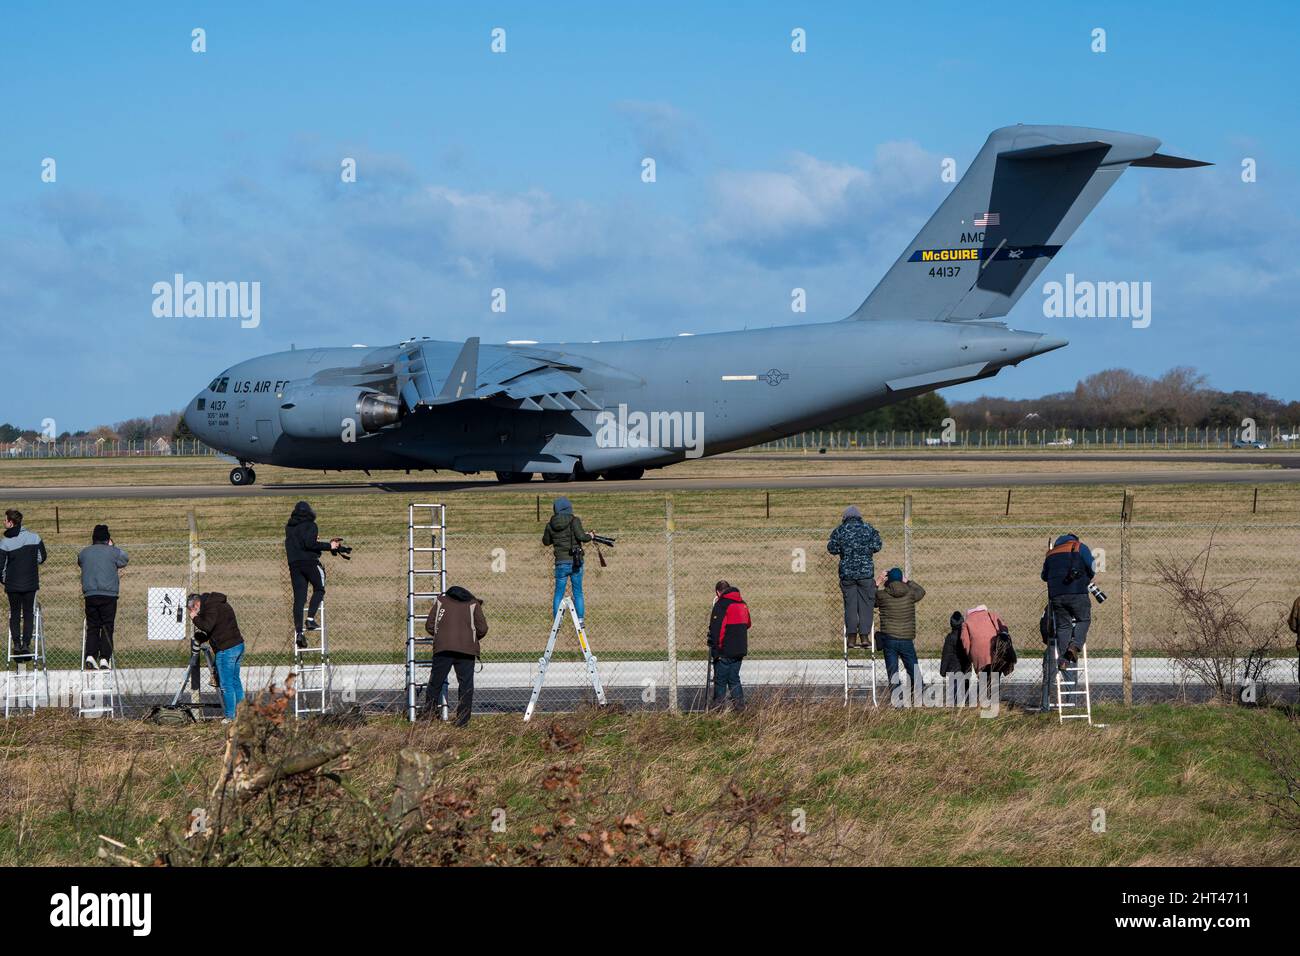 Plane spotters at Mildehall Air Field taking pictures of Boeing C-17 Globemaster III taxi-ing Stock Photo